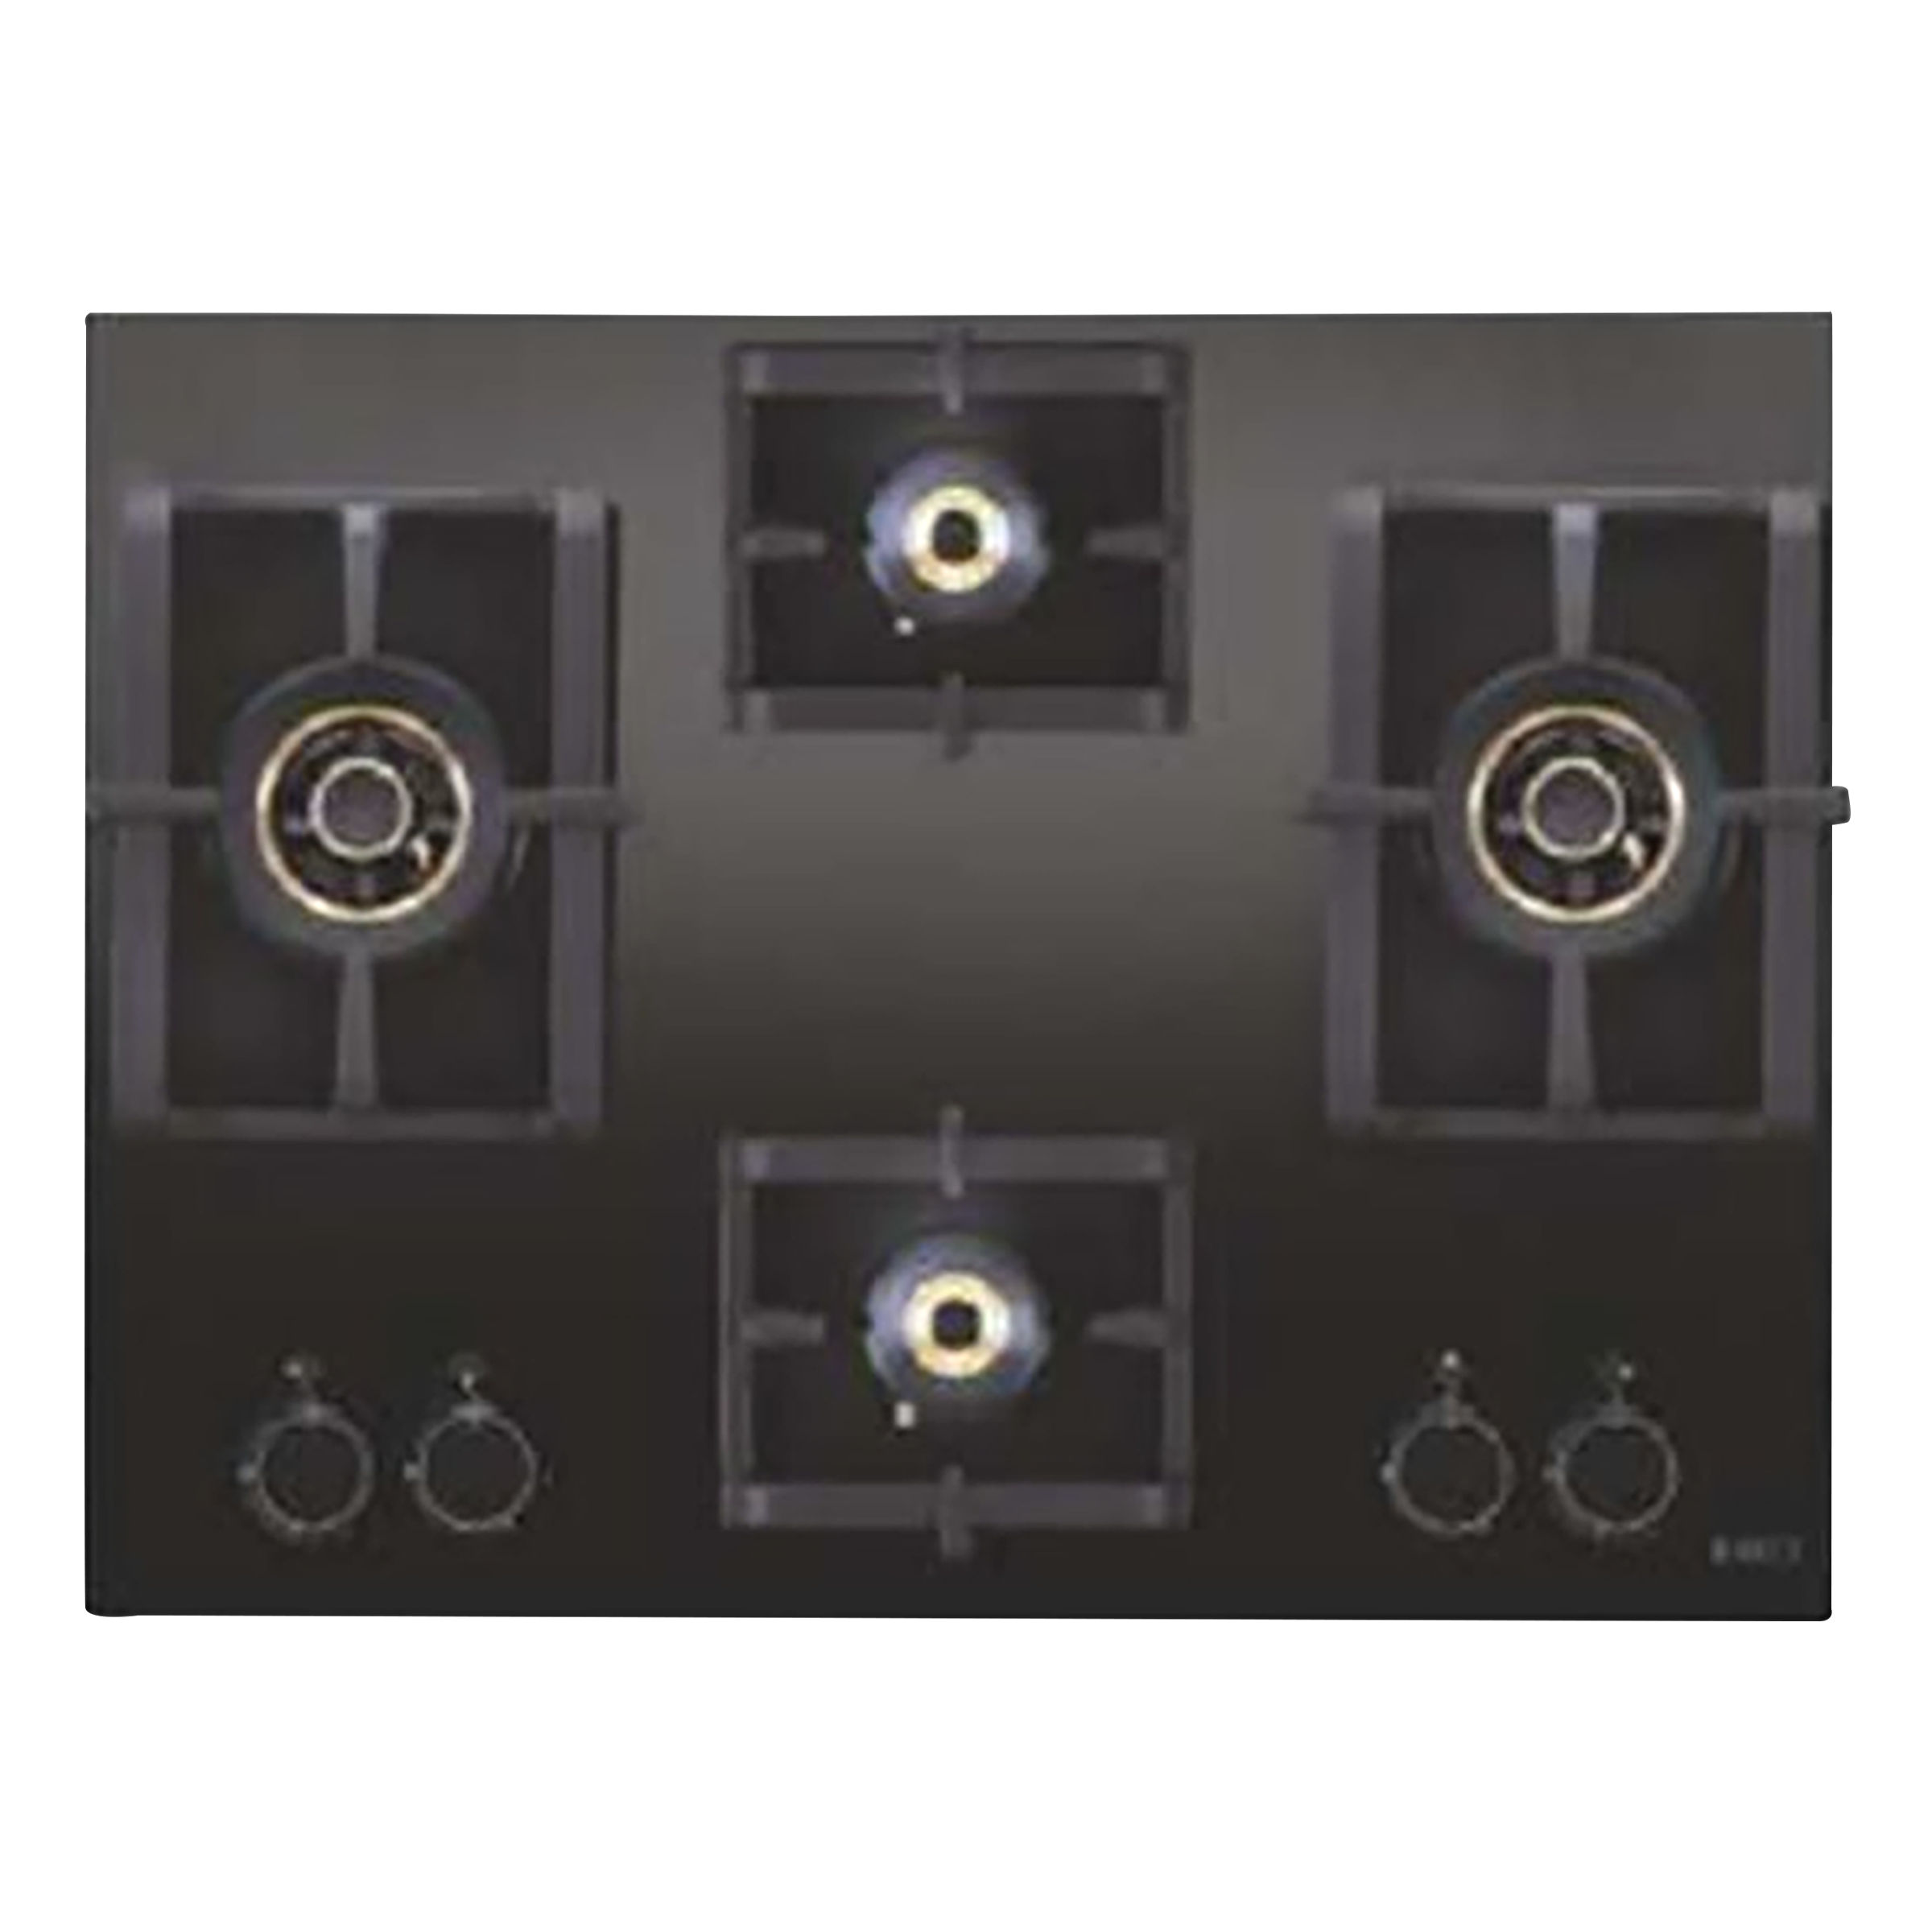 Elica Pro AB 4 Burner Glass Built-in Gas Hob (Electric Auto Ignition, 3153, Black)_1